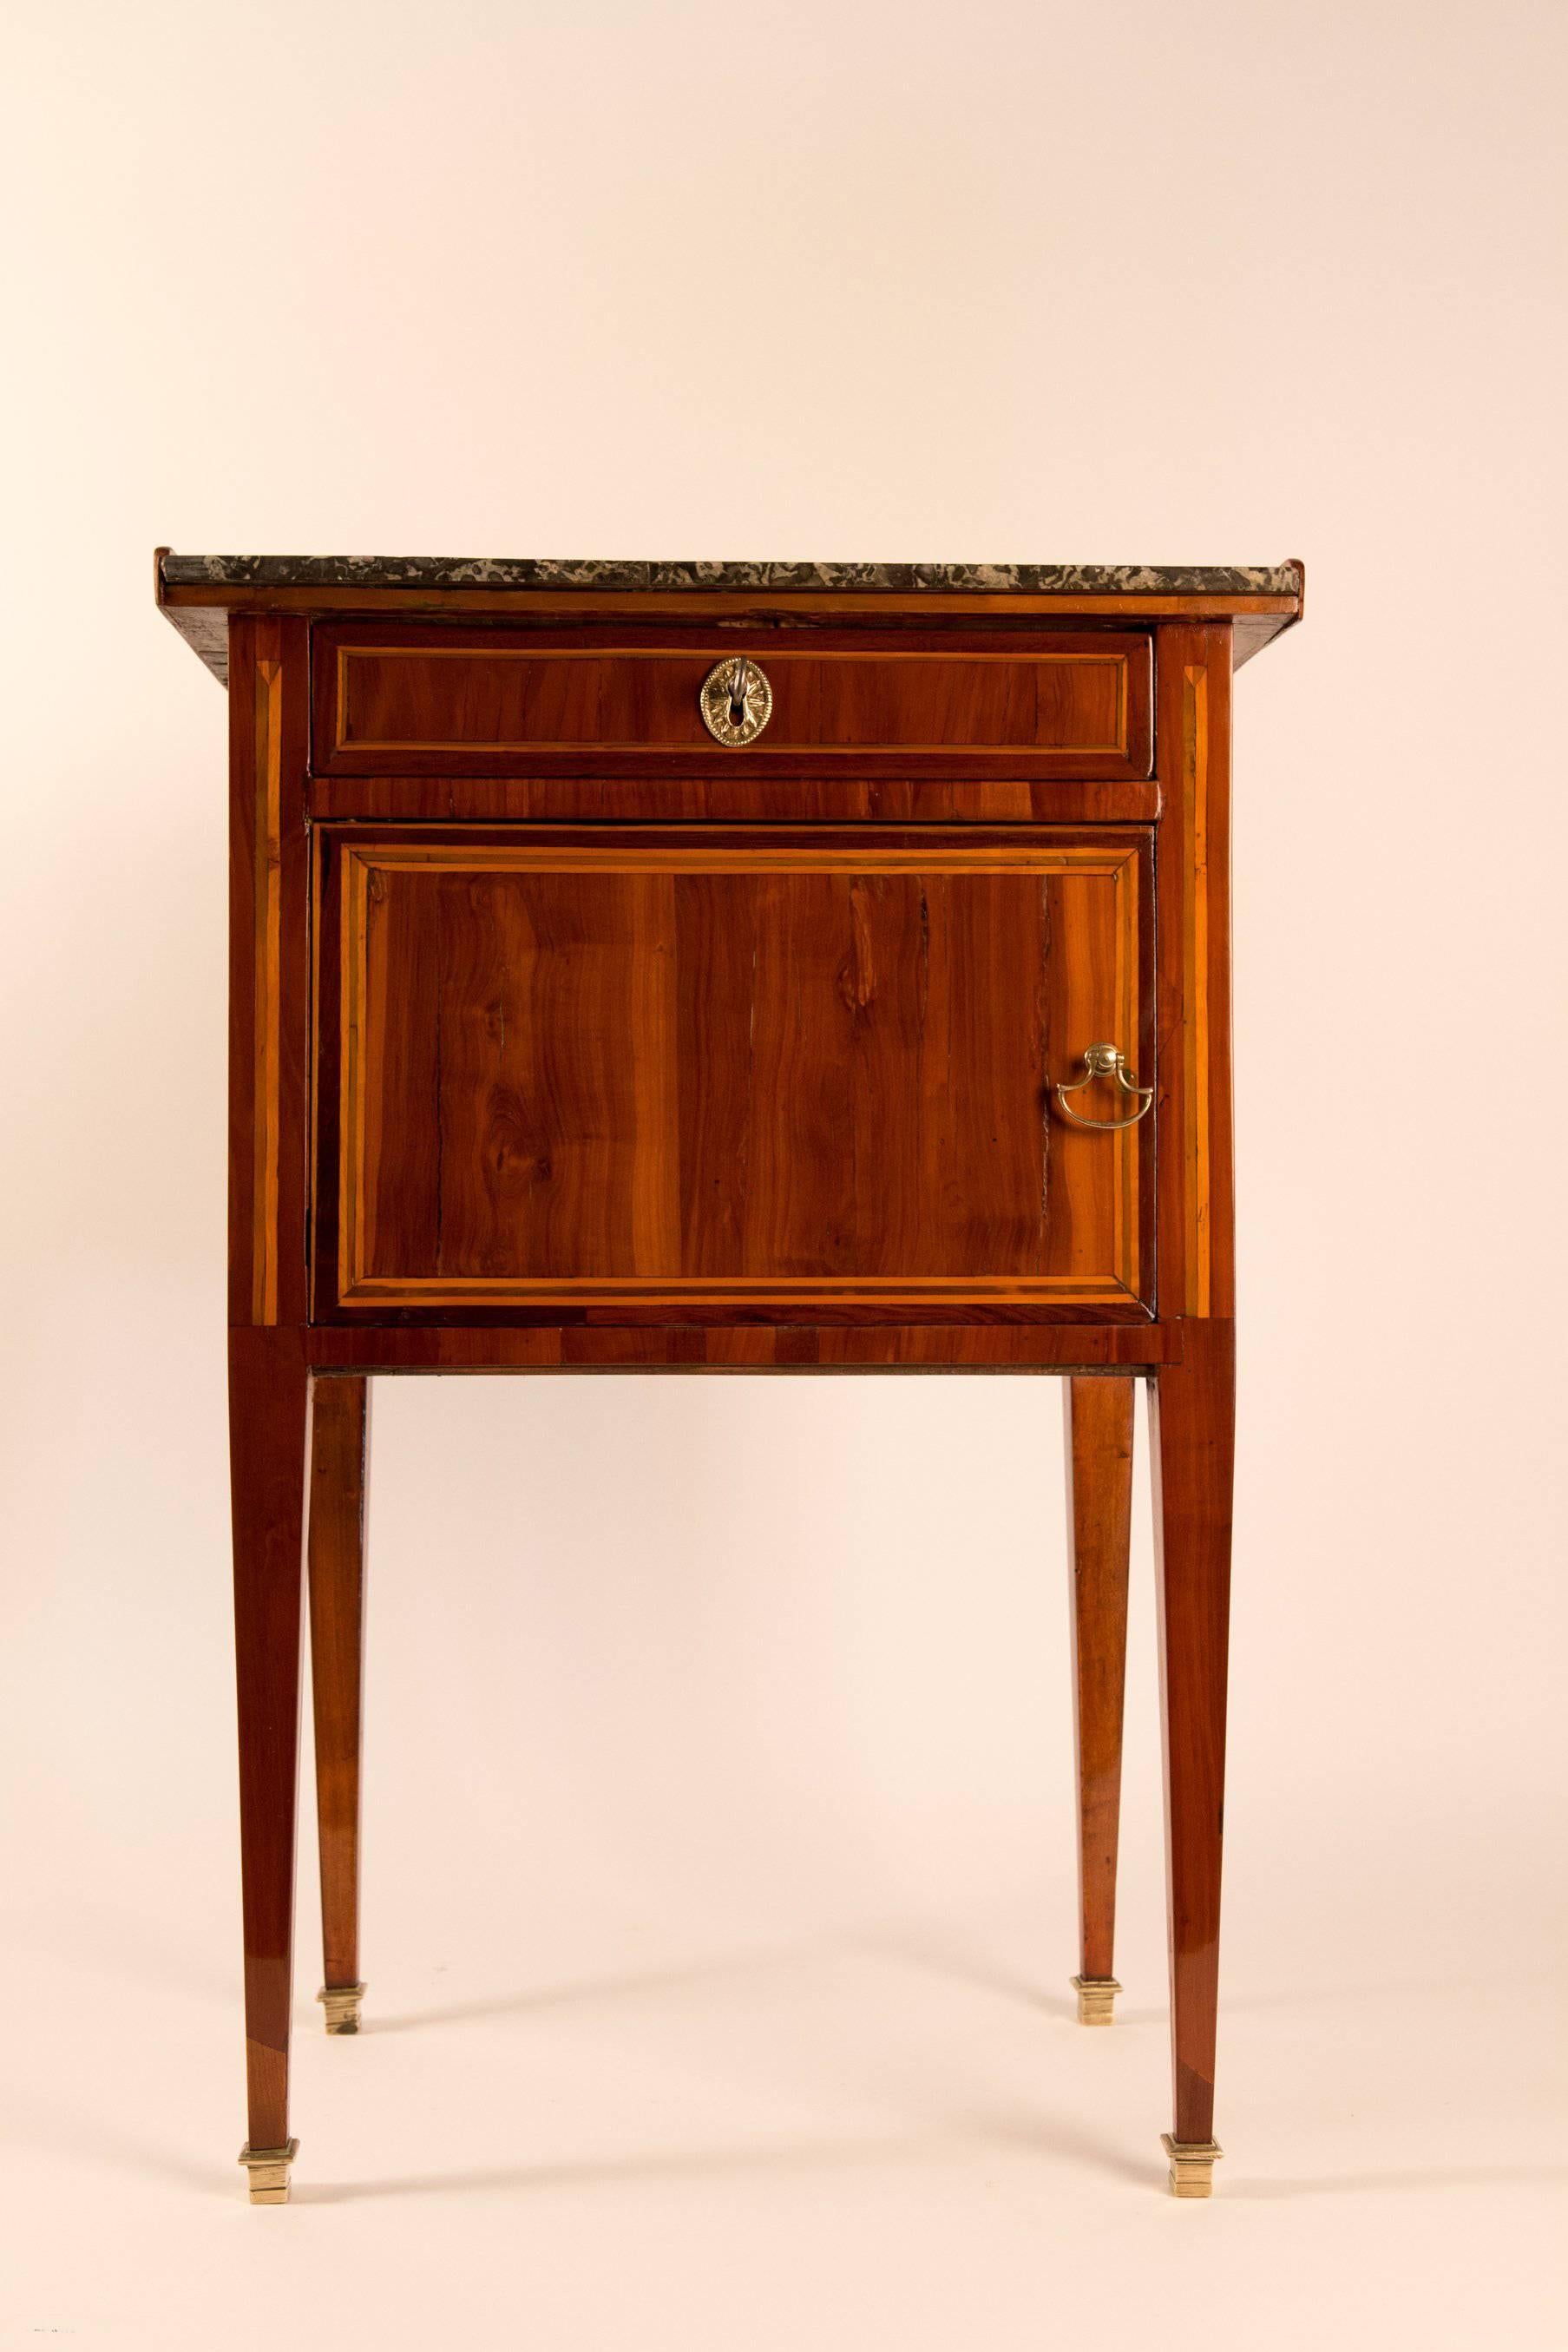 An lovely Louis XVI period, walnut, plumwood, sycamore and boxwood, small commode or small side table. Our side table opening by one drawer and a small door. It rests on elegant “gaine” legs, with a “Grey Sainte-Anne” marble top. Original bronze